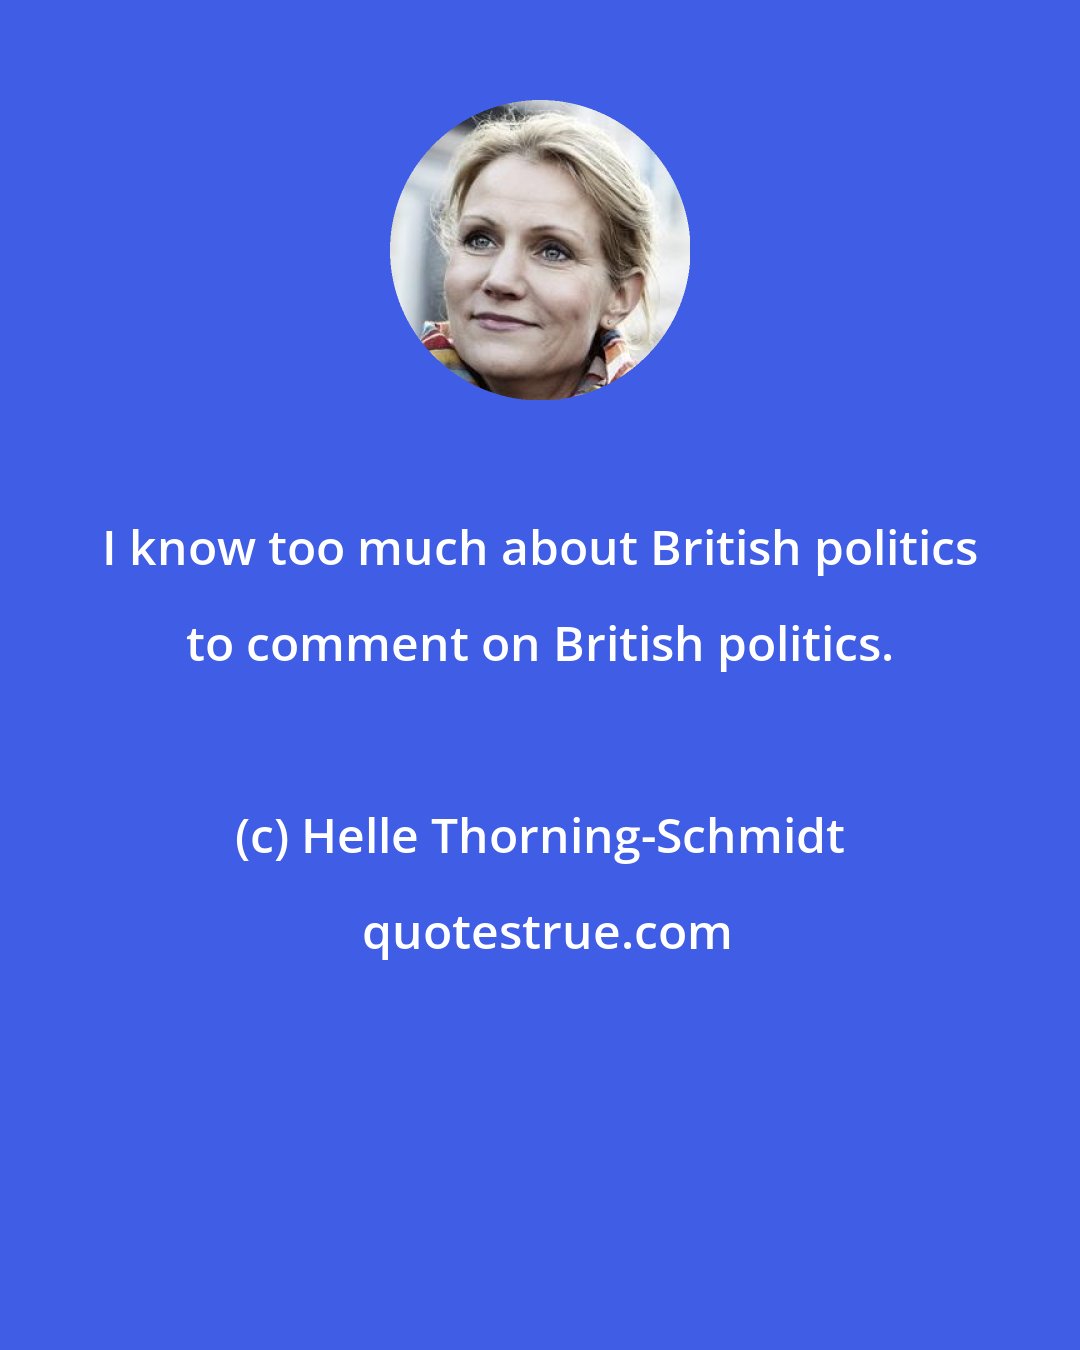 Helle Thorning-Schmidt: I know too much about British politics to comment on British politics.